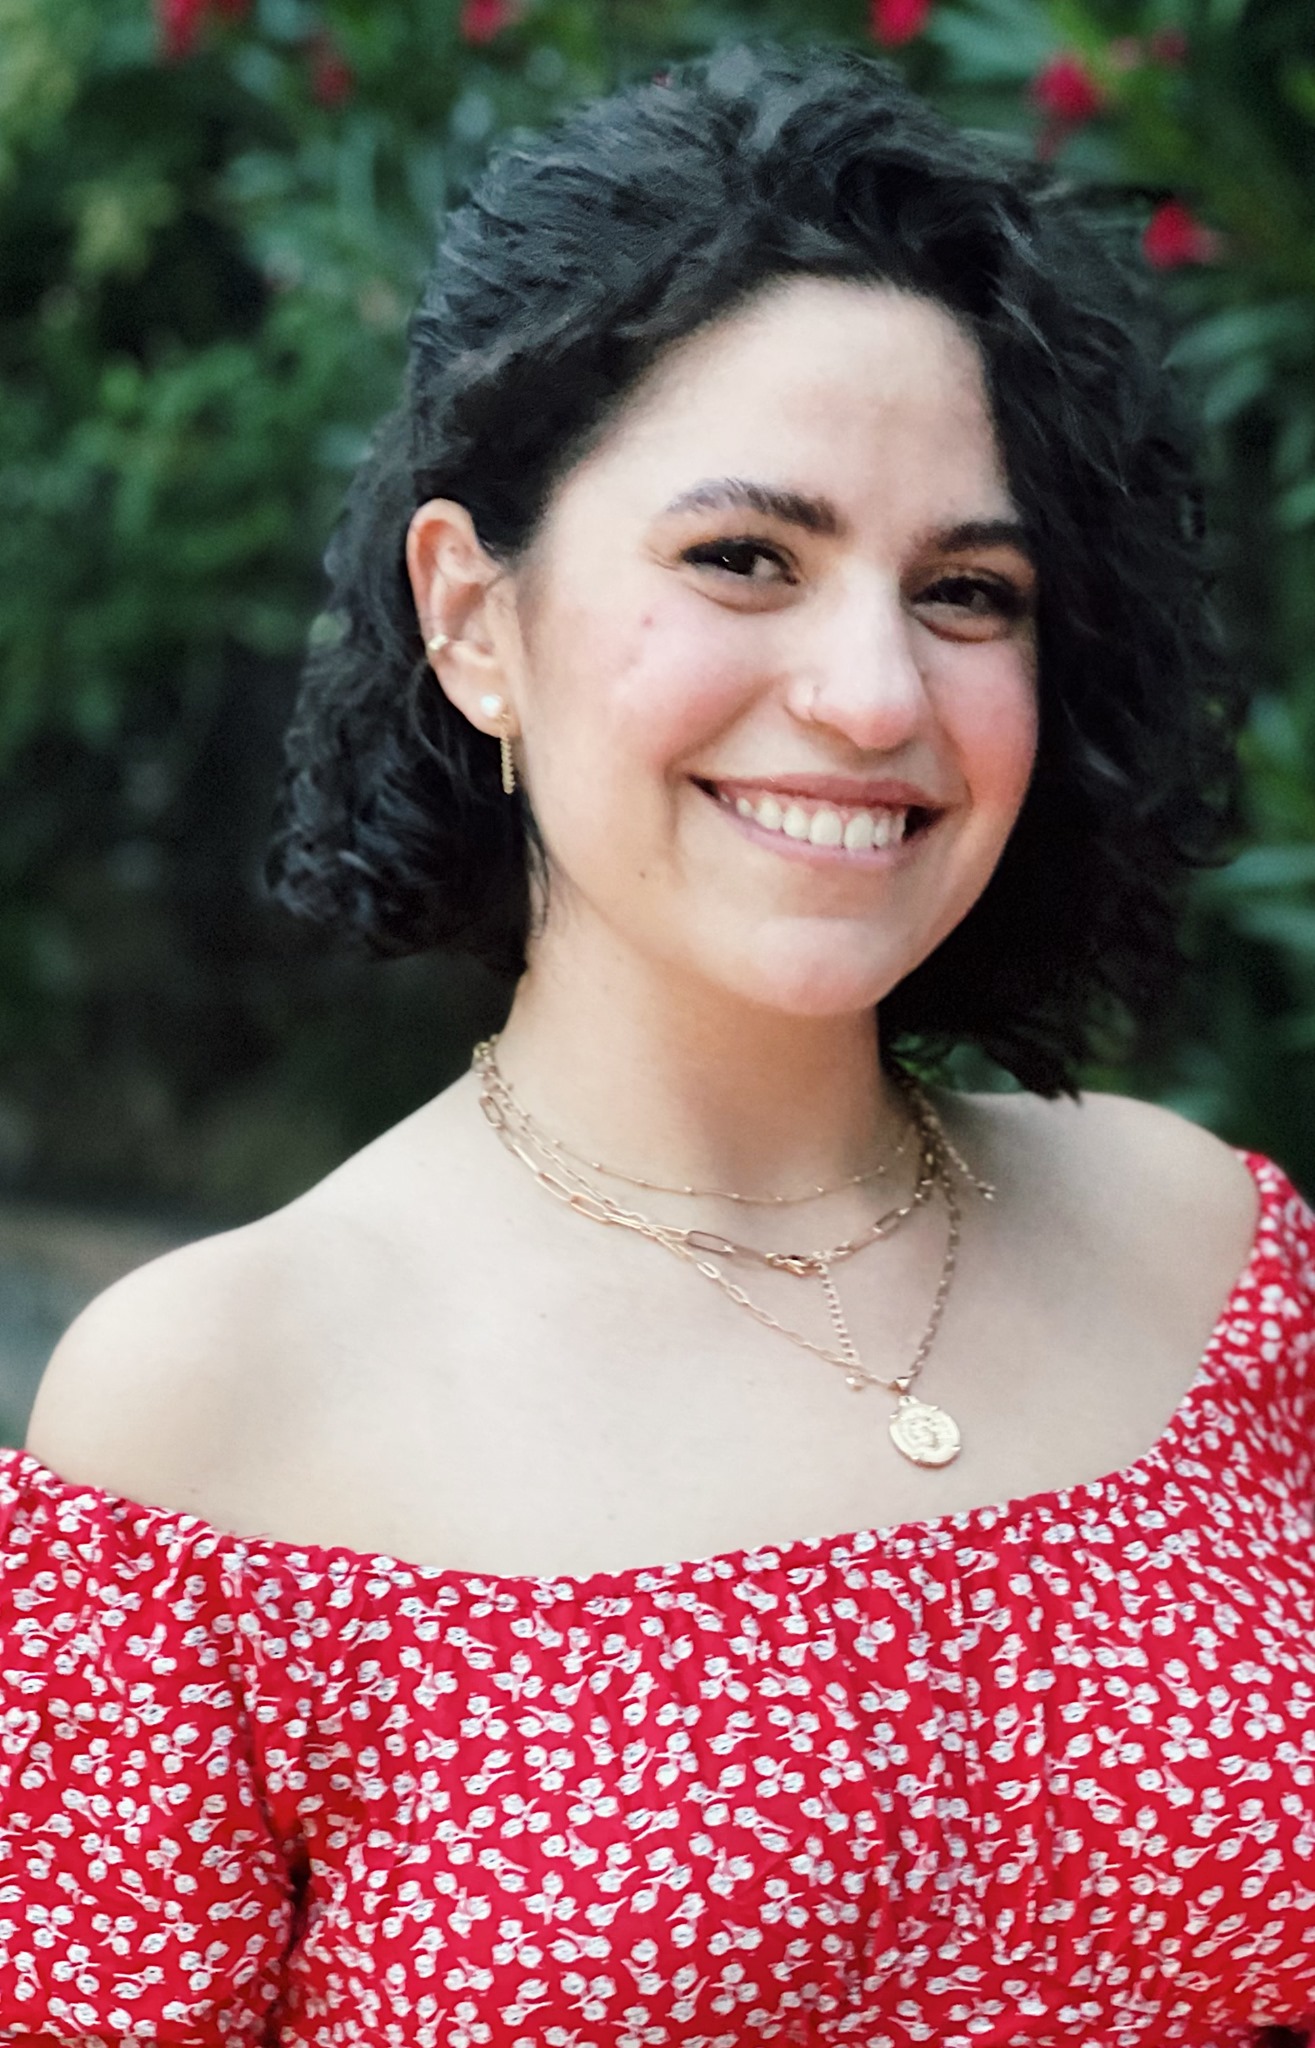 Headshot of Ana Sondoval. Greenery sits in the blurry background. Sandoval is wearing a red and white floral top and some gold necklaces.